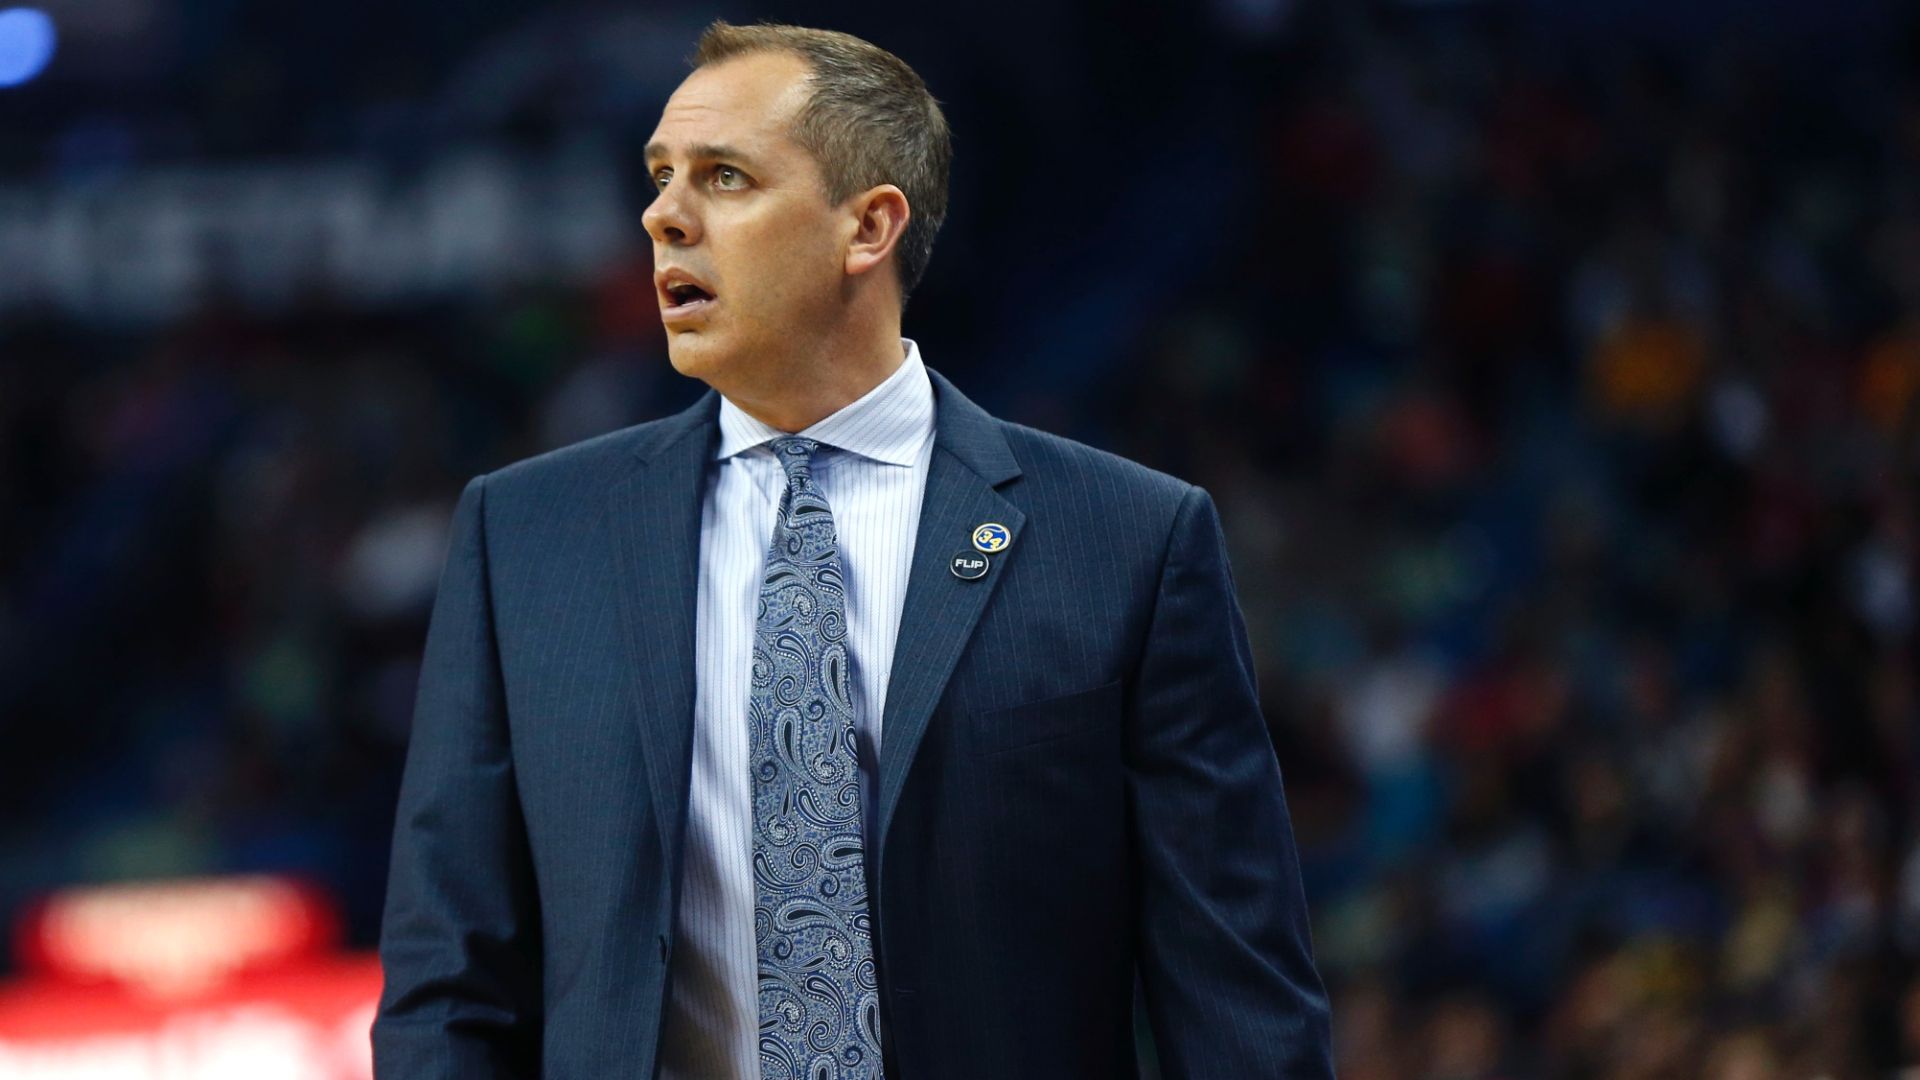 Is Phil Jackson seriously considering Frank Vogel?